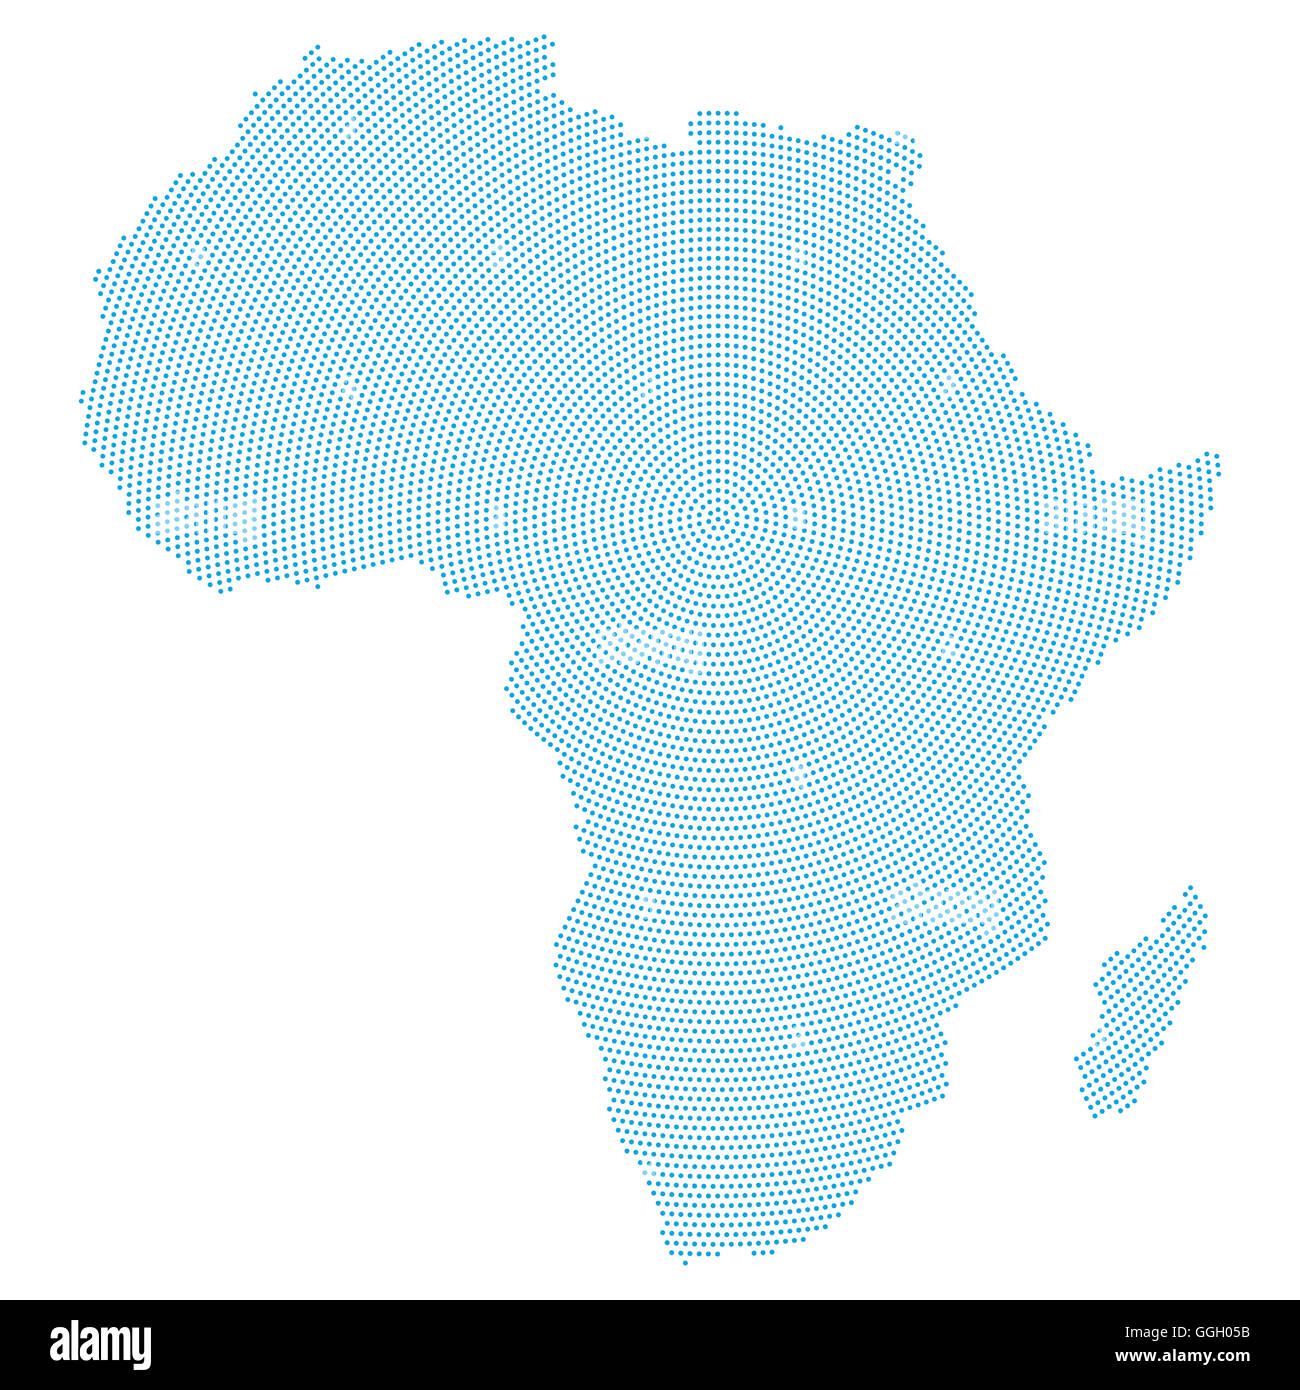 Africa map radial dot pattern. Blue dots going from the center outwards and form the silhouette of the african continent area. Stock Photo